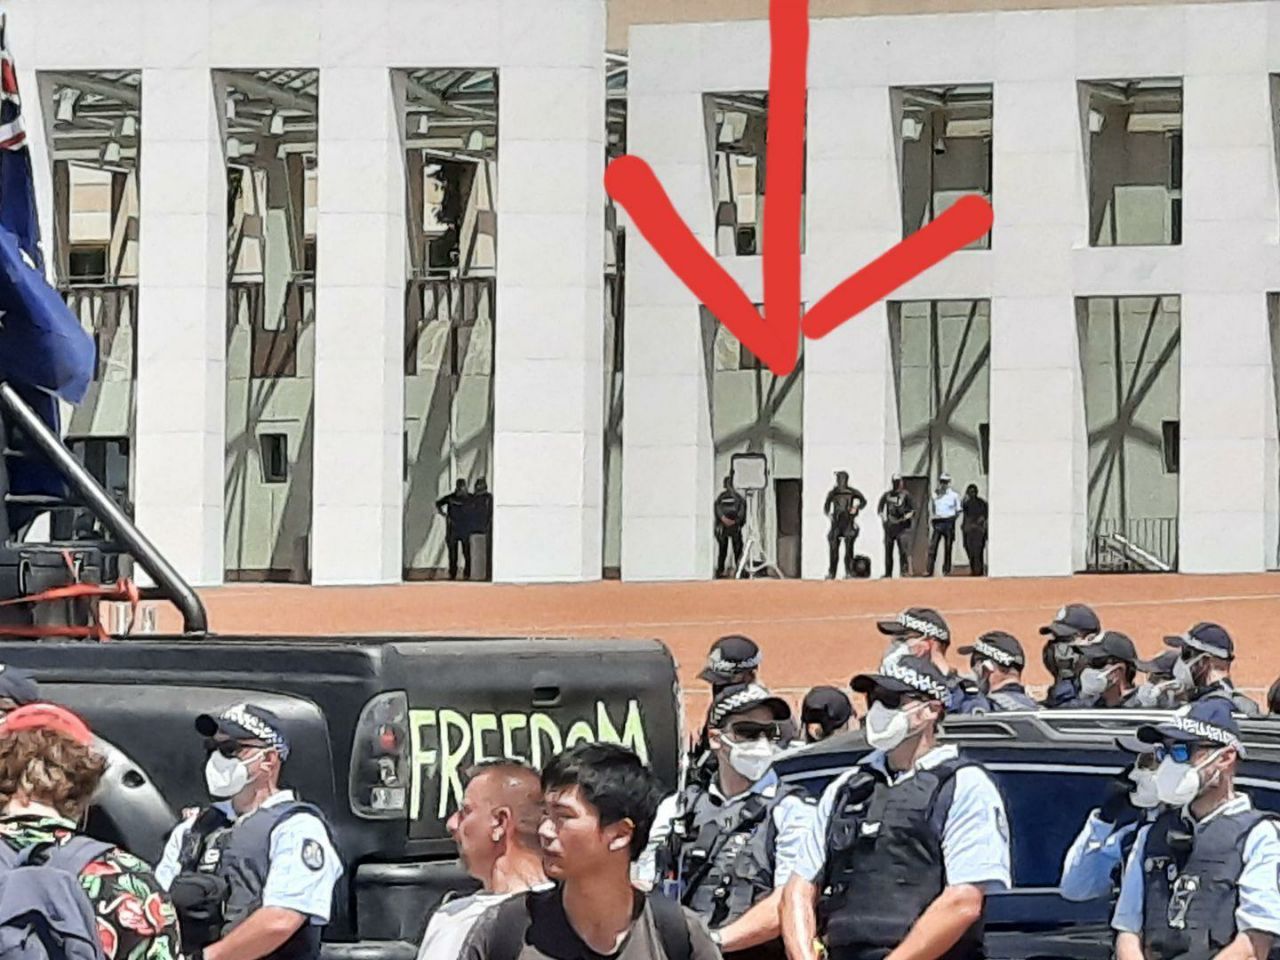 Energy weapons used at Canberra Protests?